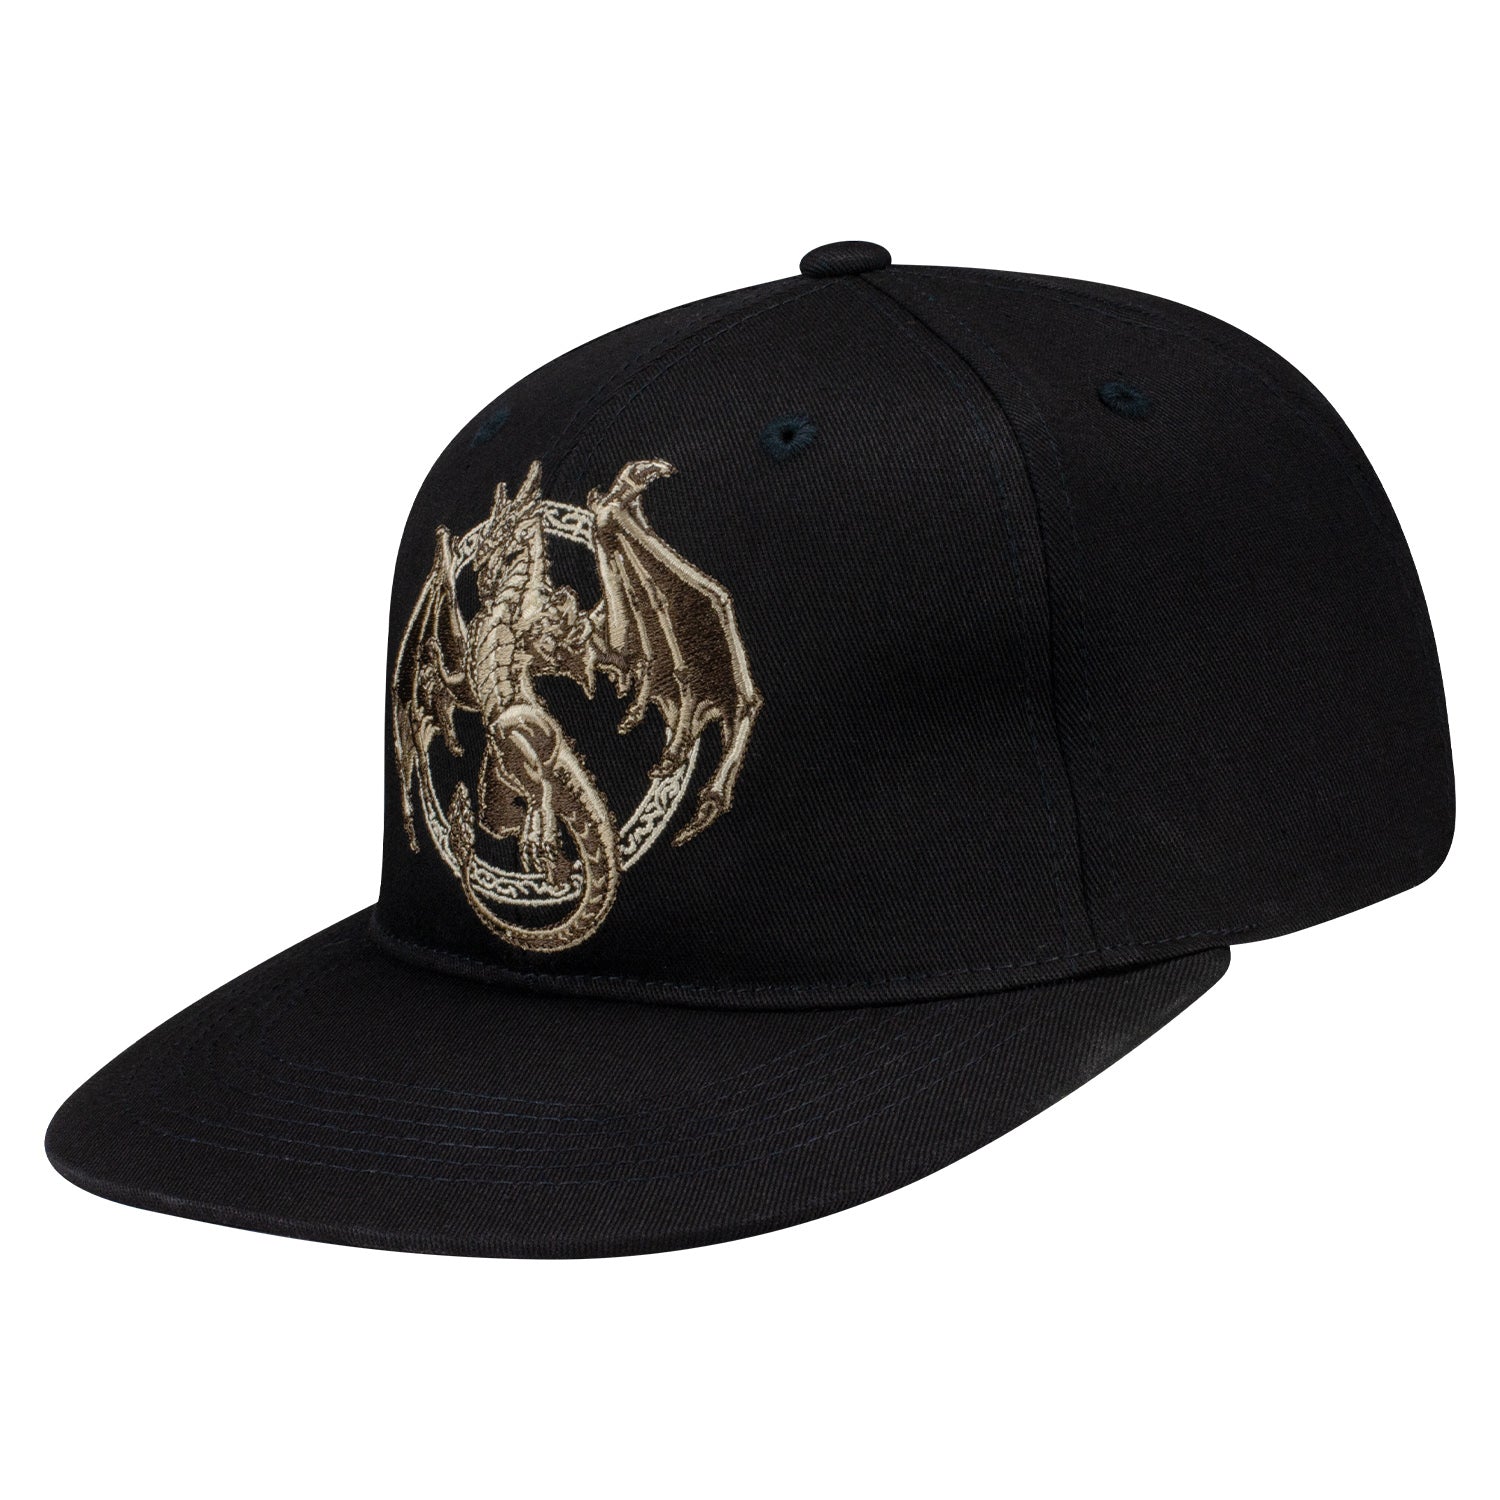 World of Warcraft Wrathion Dragon Snapback Hat - Front View